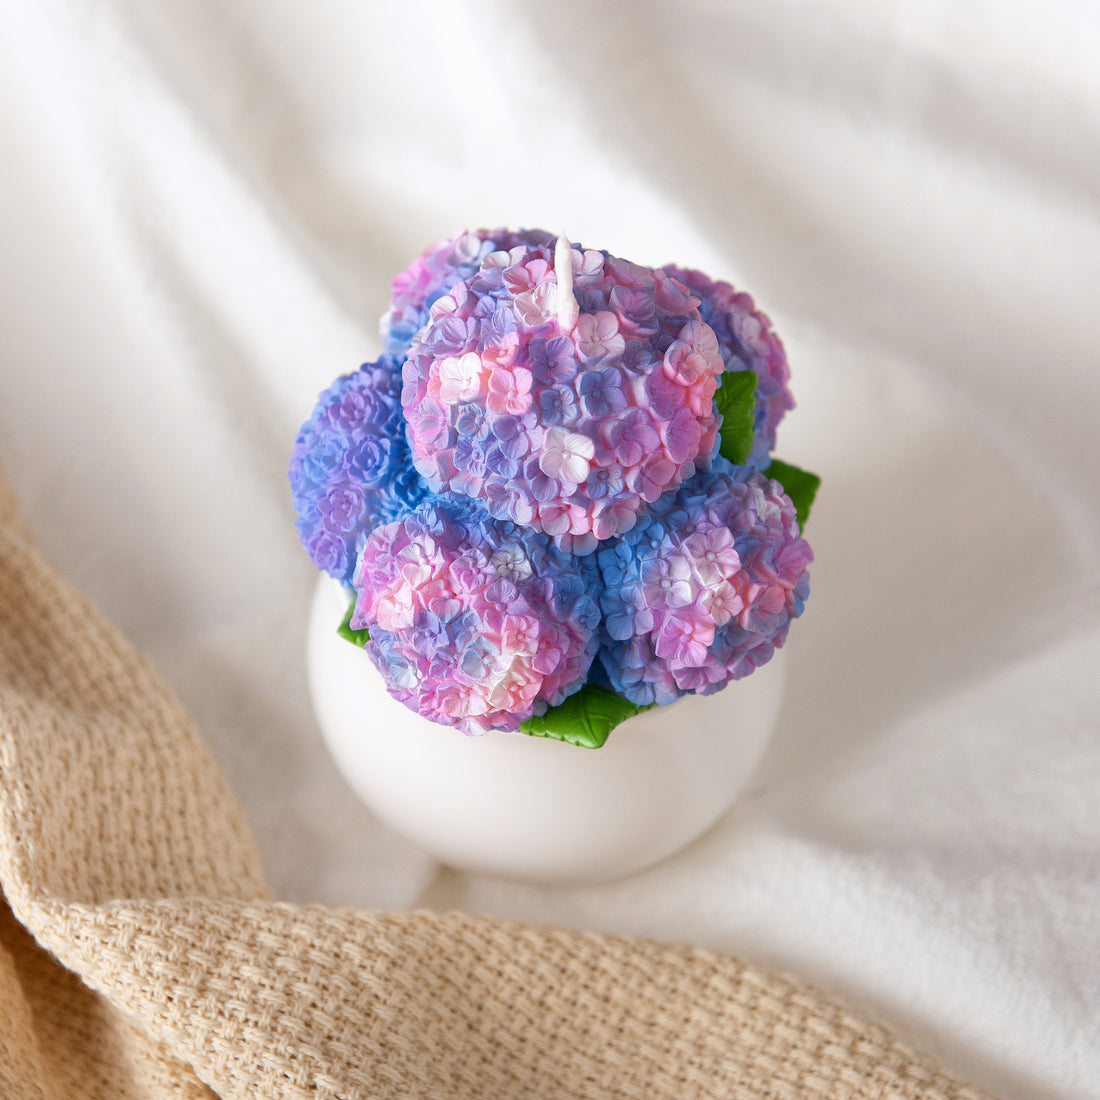 Realistic Hydrangea Candle, perfect for enhancing your home decor or as a thoughtful gift - Southlake Gifts